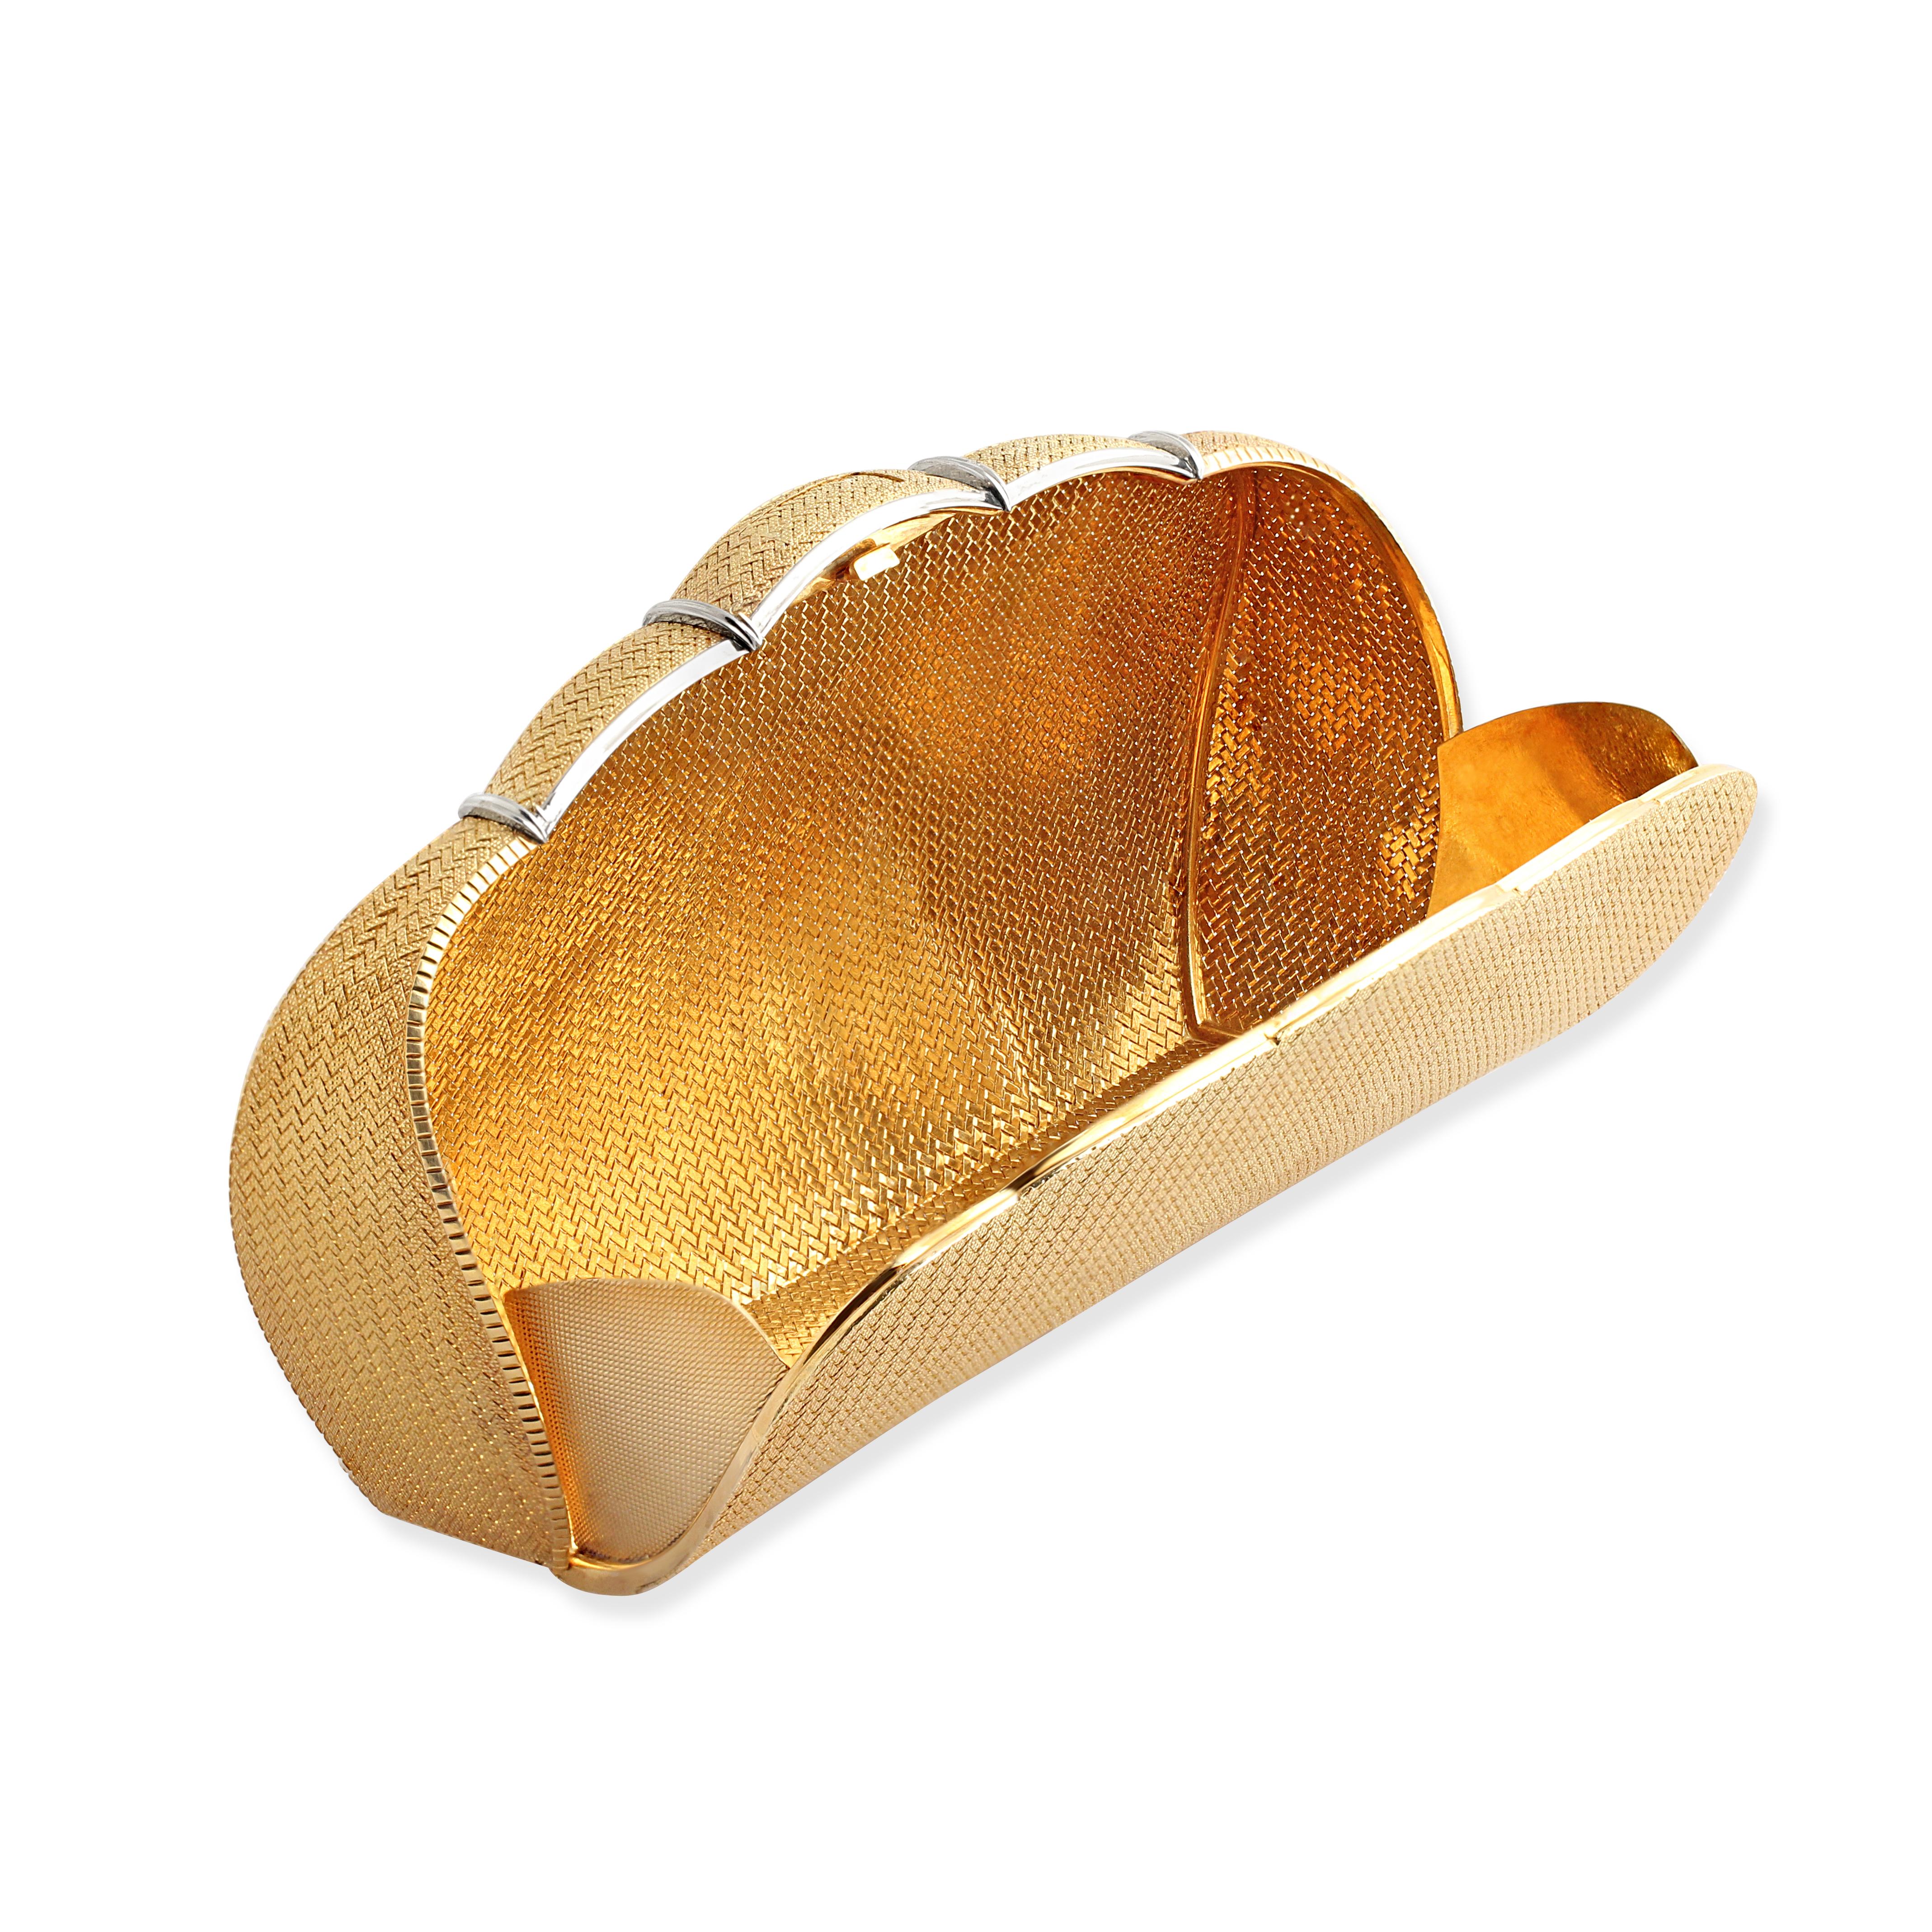 A vintage gold clutch bag by Bulgari with a scalloped edge. Crafted from woven 18k yellow gold with a discreet push clasp. Weight = 344.40gr. Circa 1970s. 17.5cm x 10cm (at widest and tallest points)

$57,500